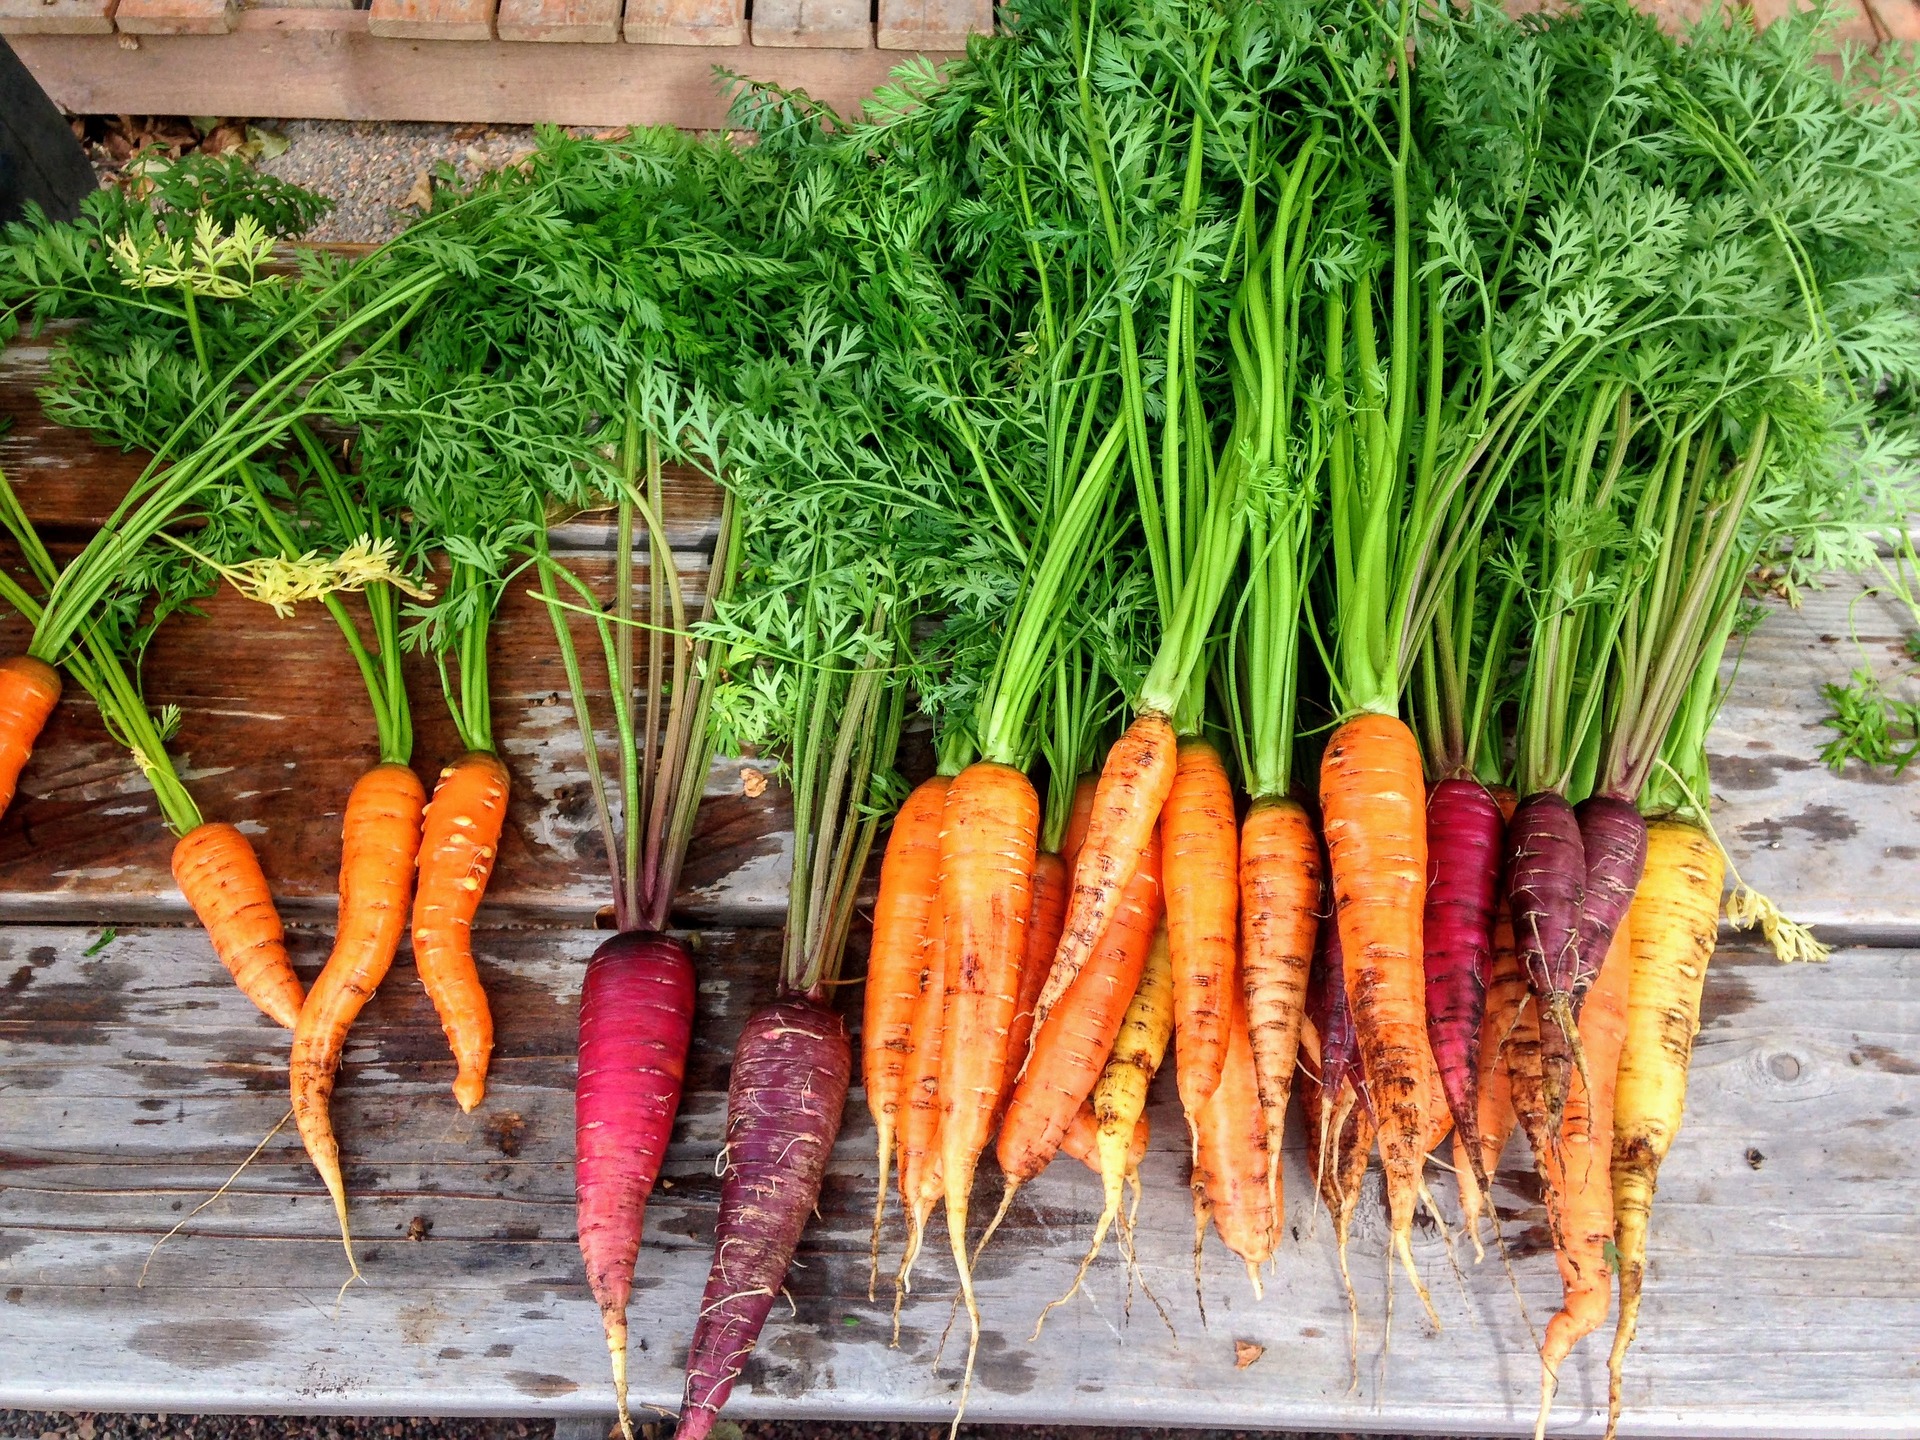 4 Recipes to Make with the Harvest From Your Home Garden